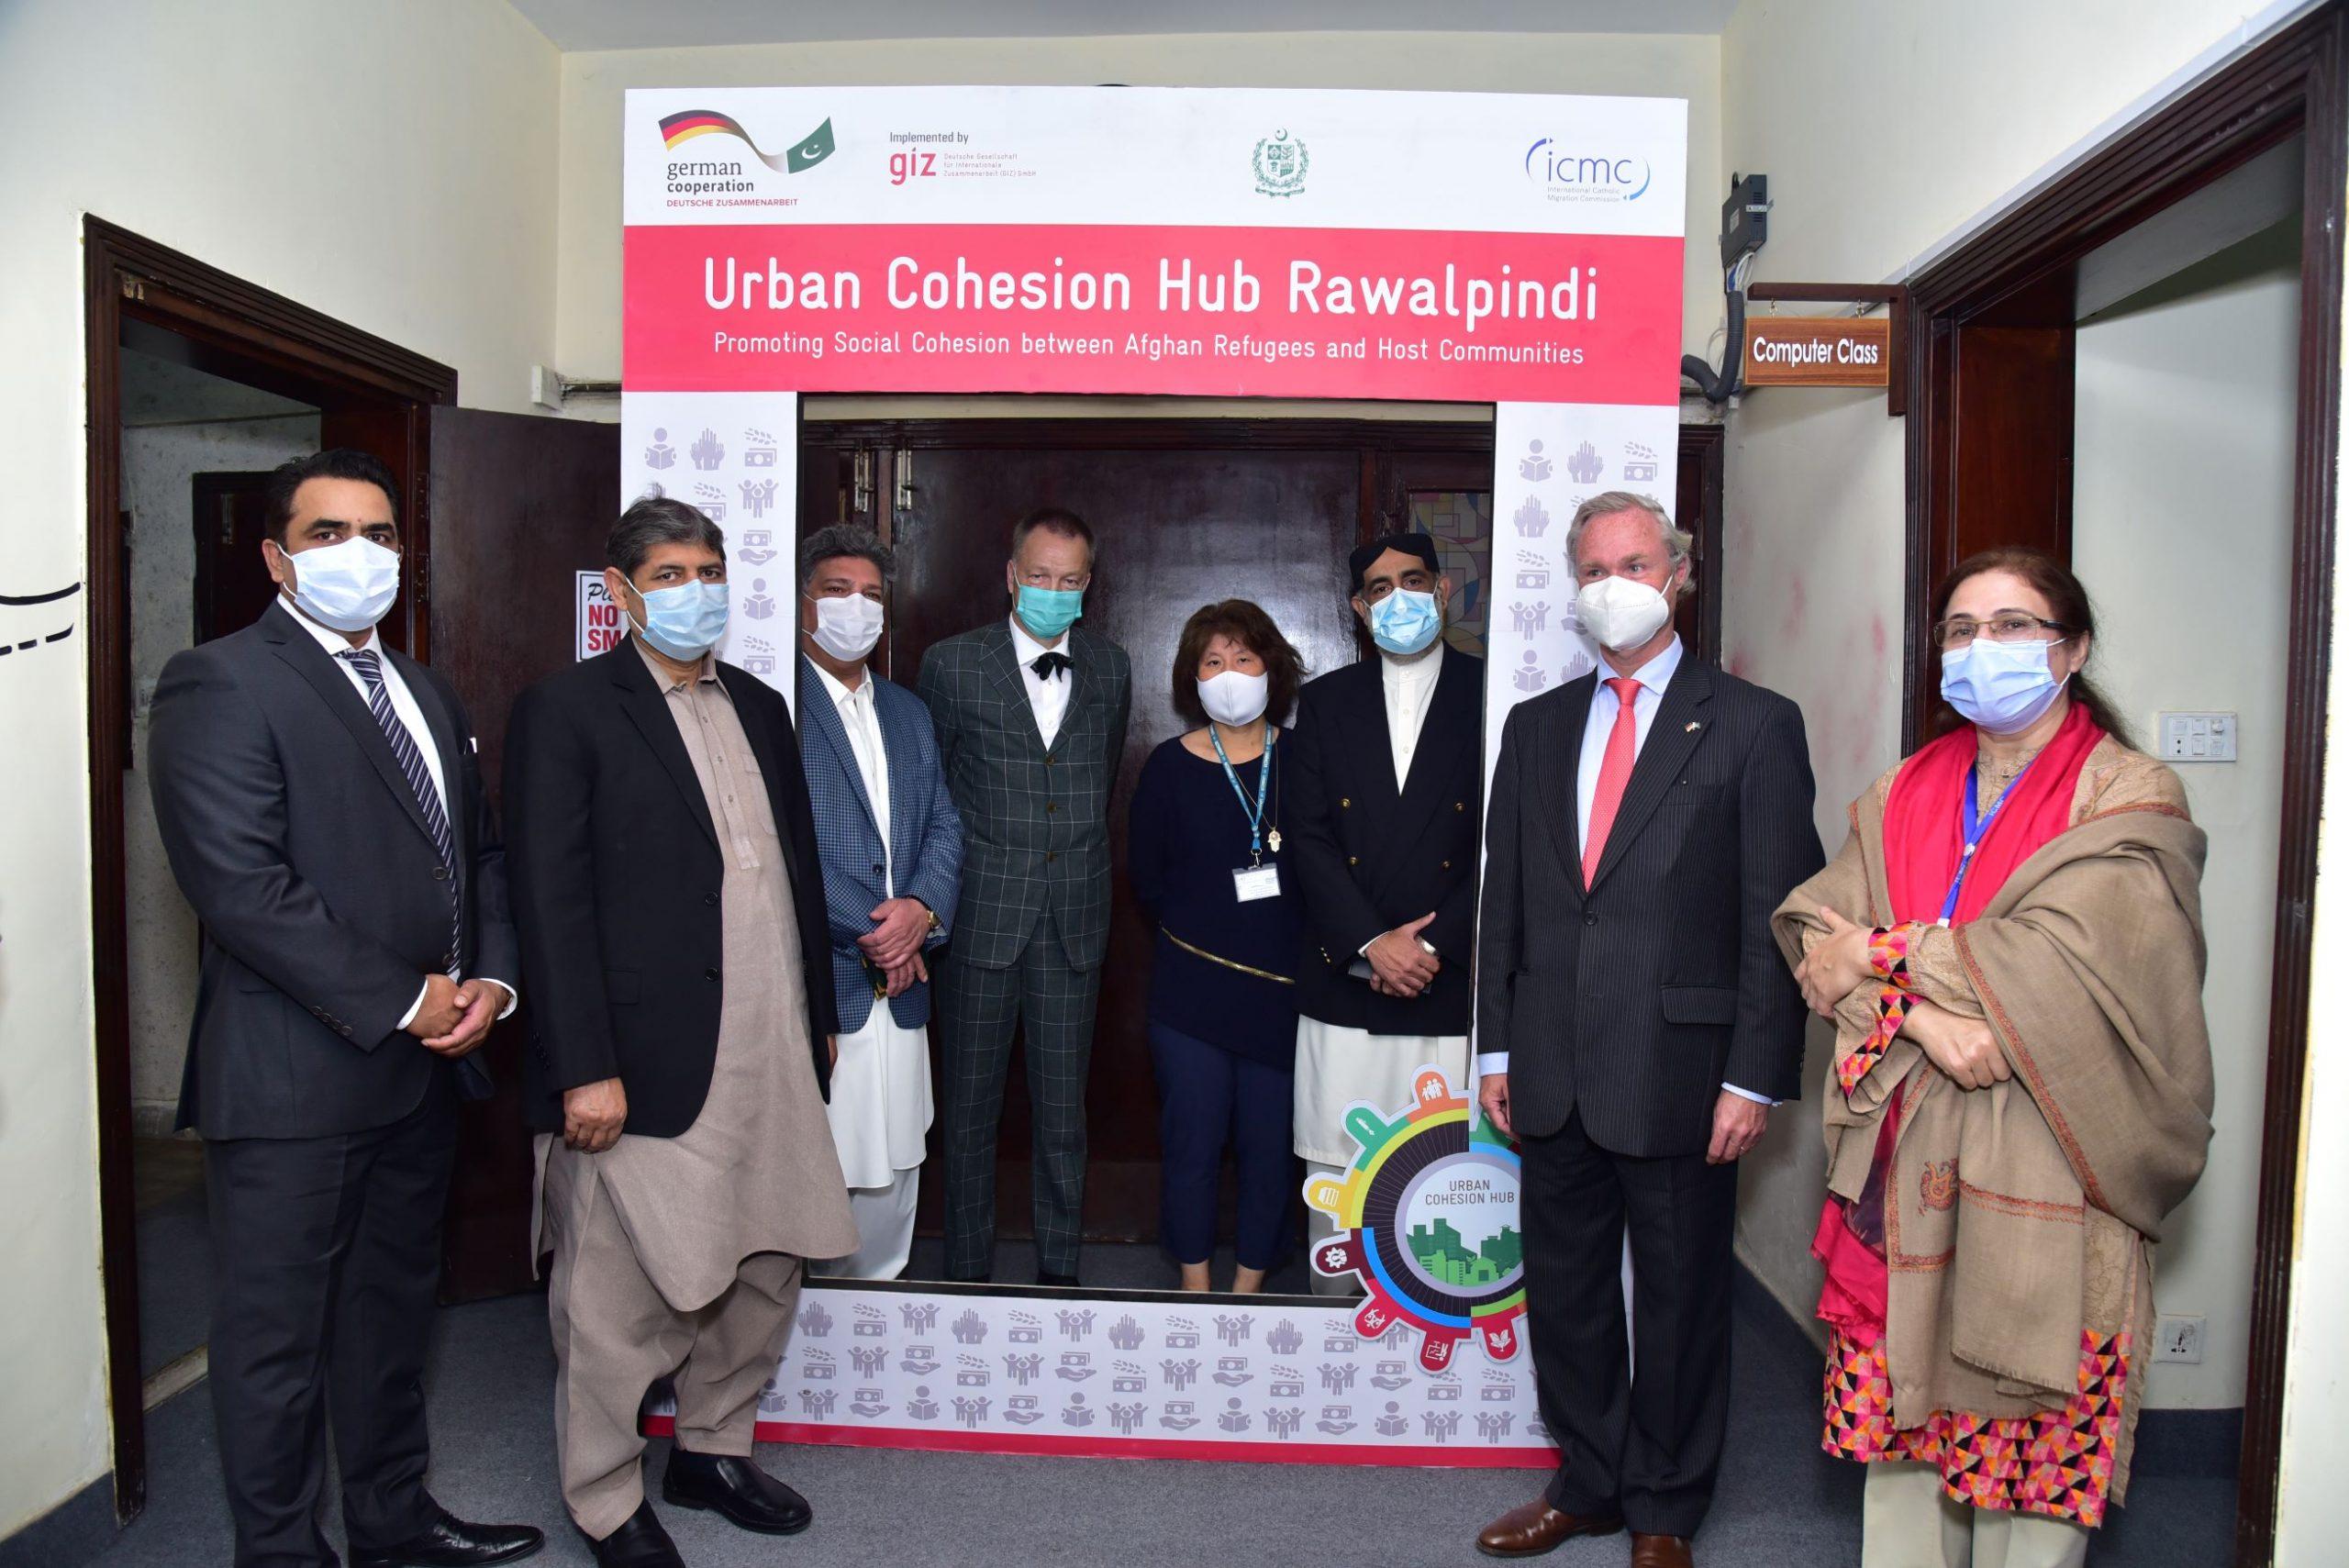 Pakistani and German Governments Launch “Urban Cohesion Hub” for Afghan Refugee and Host Communities in Rawalpindi